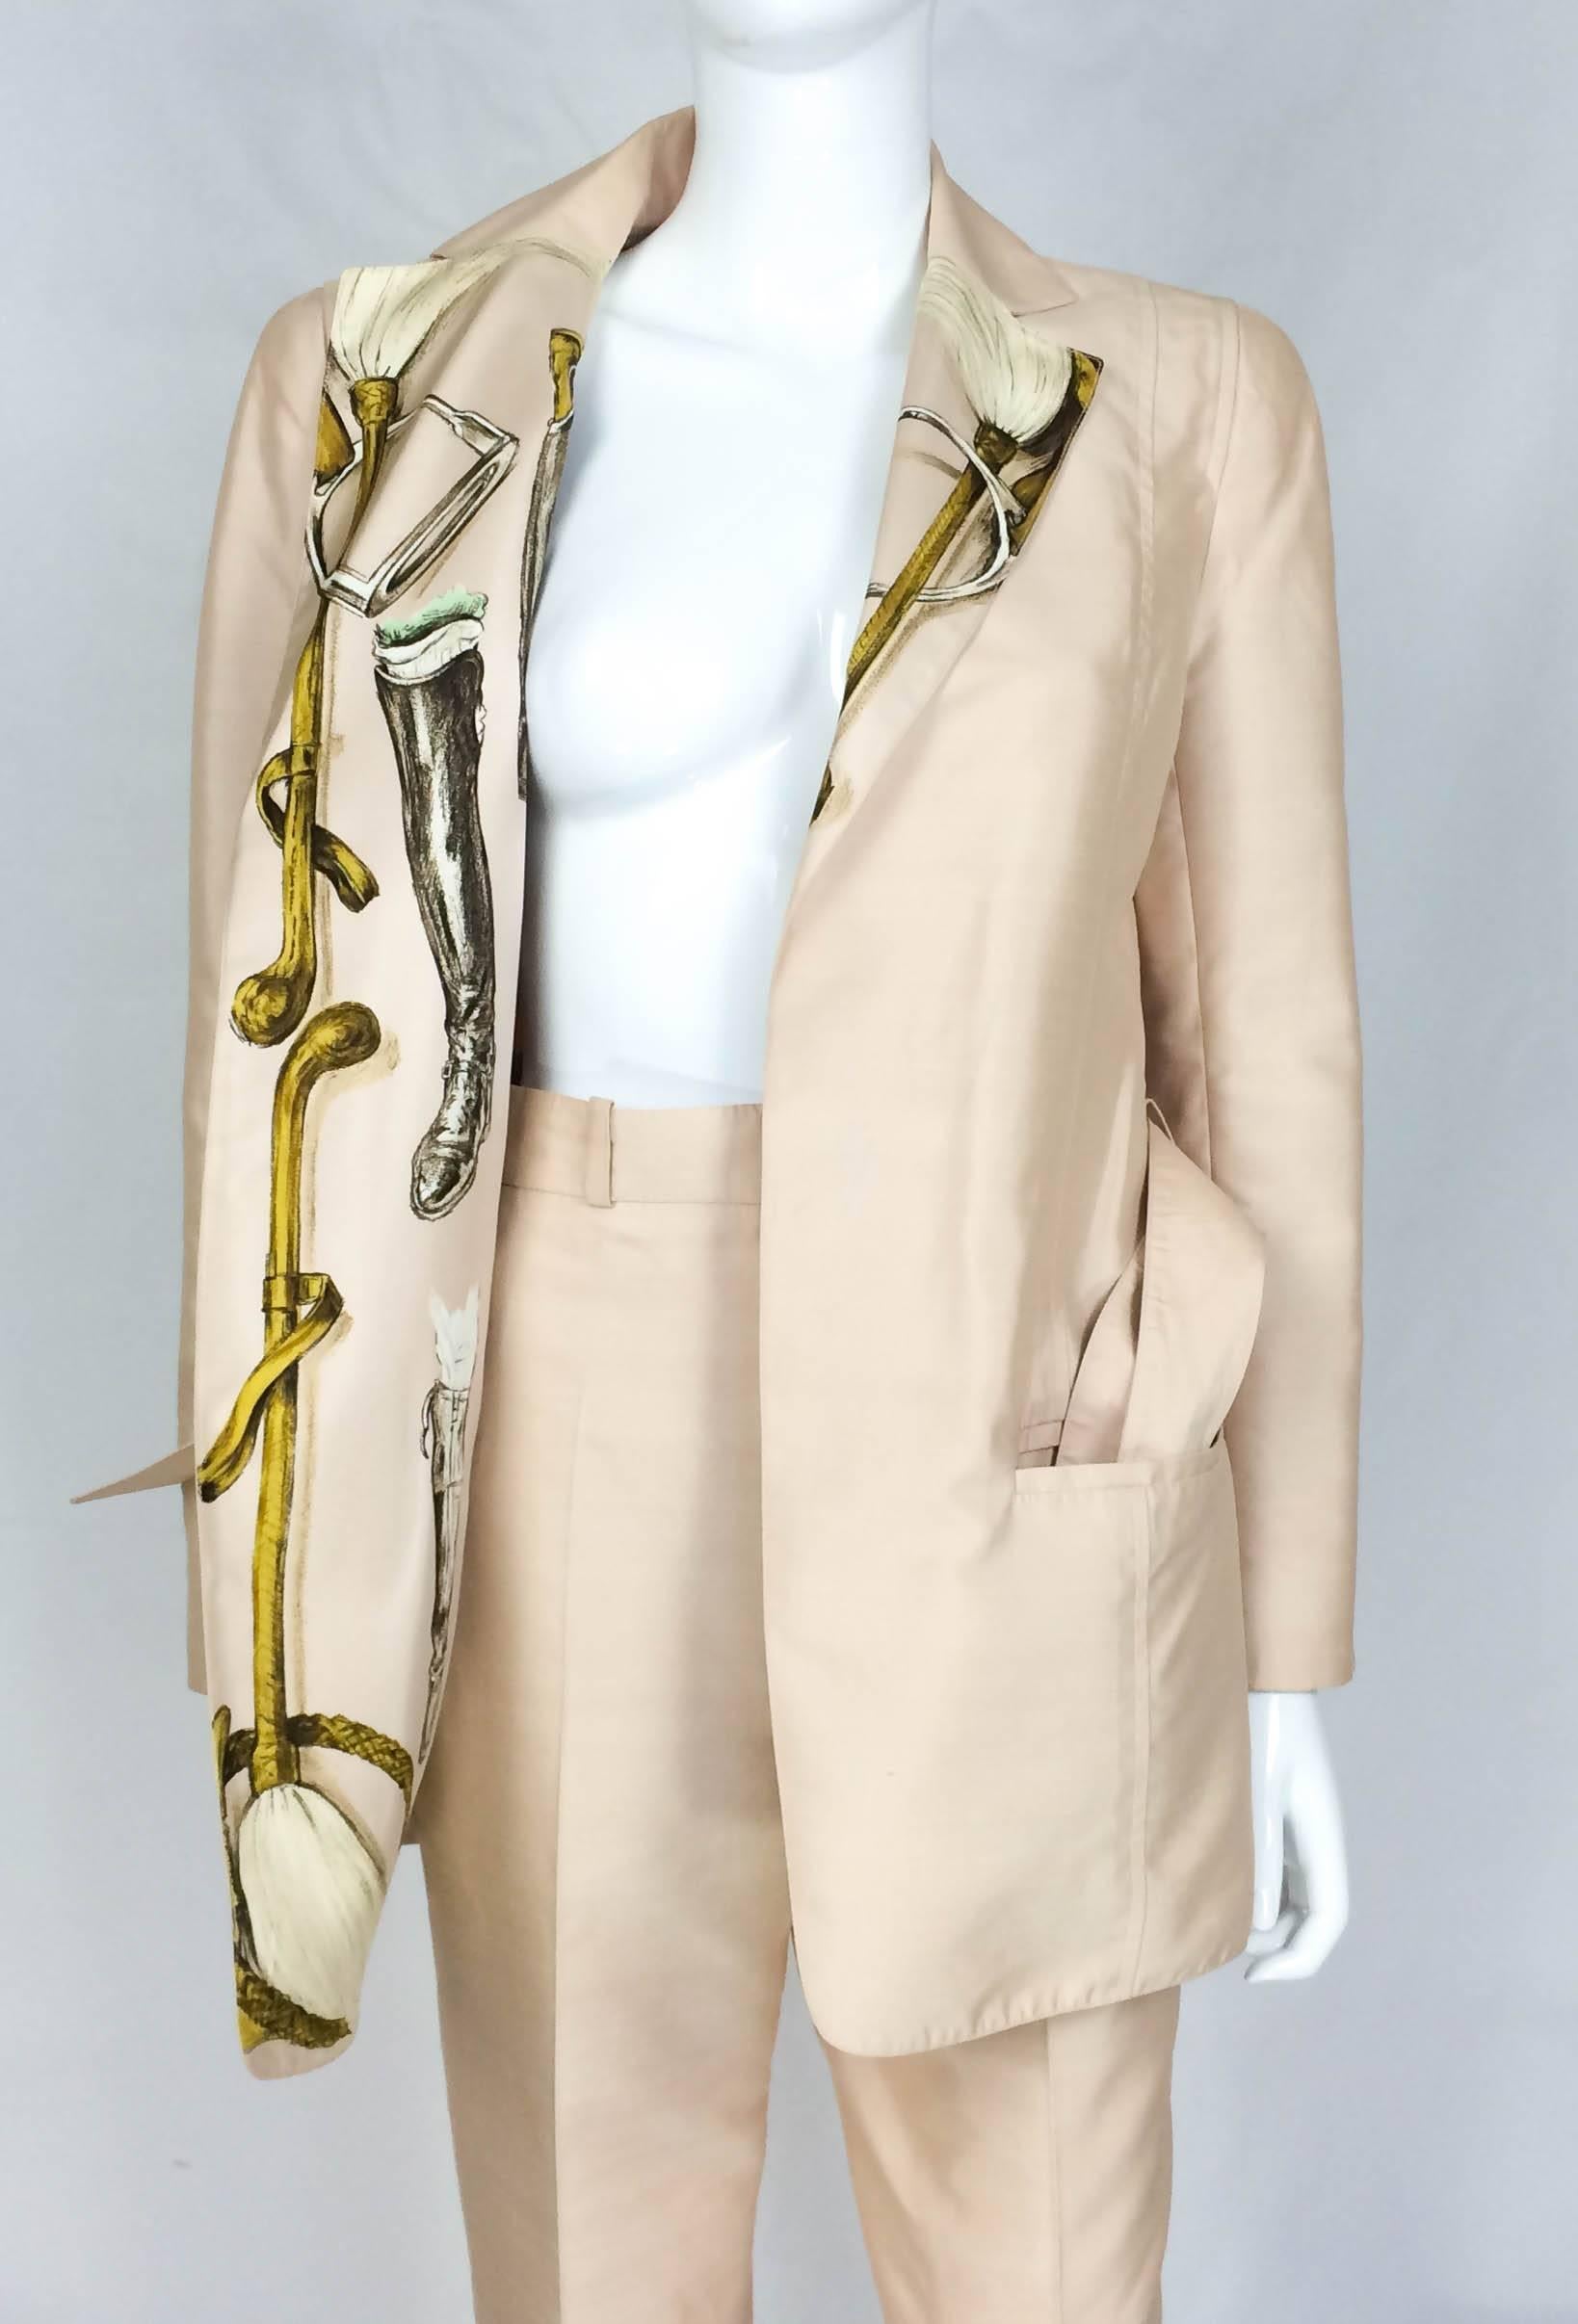 Beige Rare Hermes Suit with 'A Propos de Bottes' Print on Lapels and Lining - 1980s